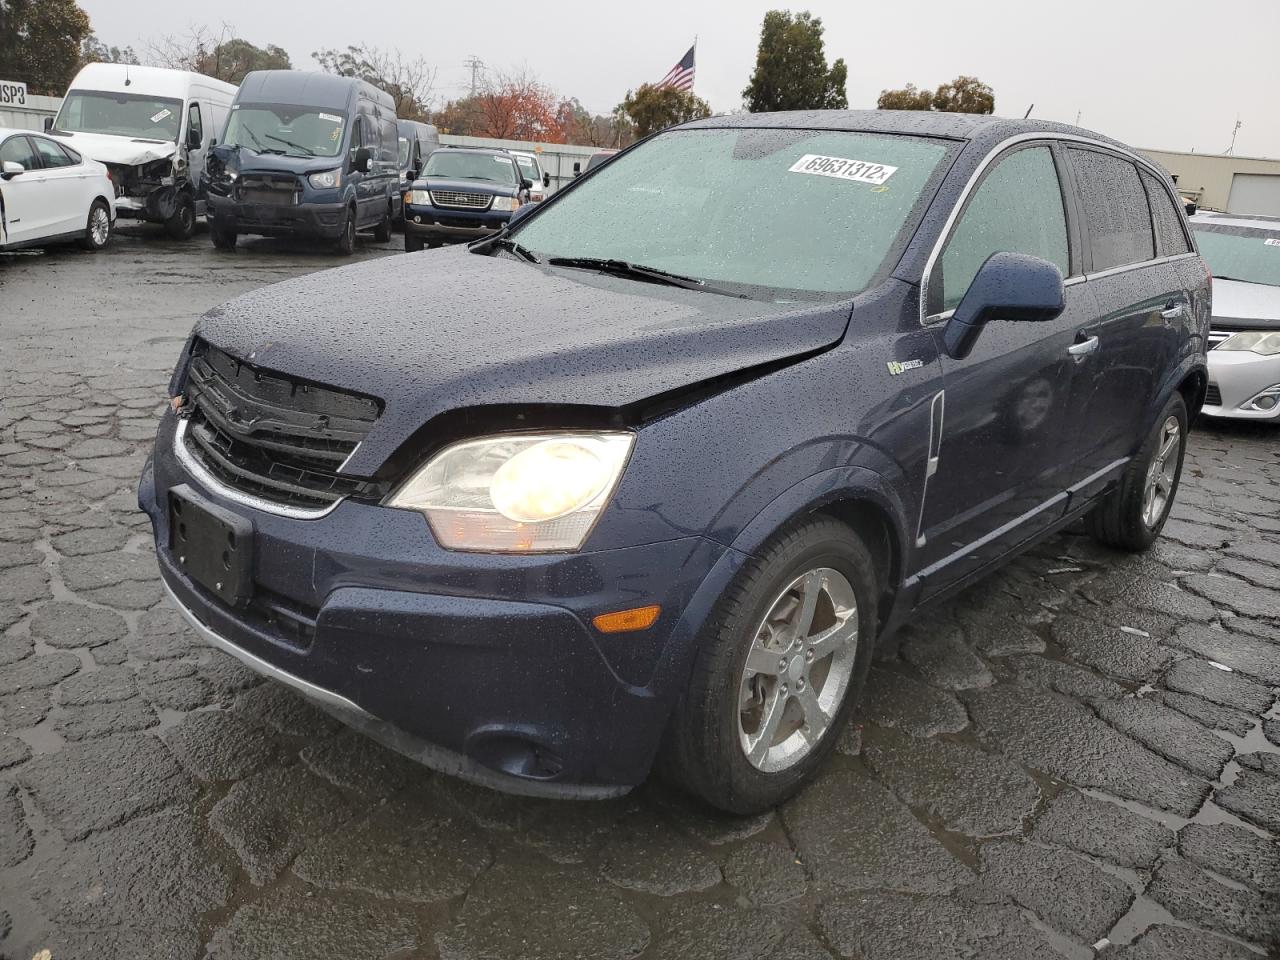 2009 Saturn Vue Hybrid for sale at Copart Martinez, CA Lot #69631*** |  SalvageReseller.com